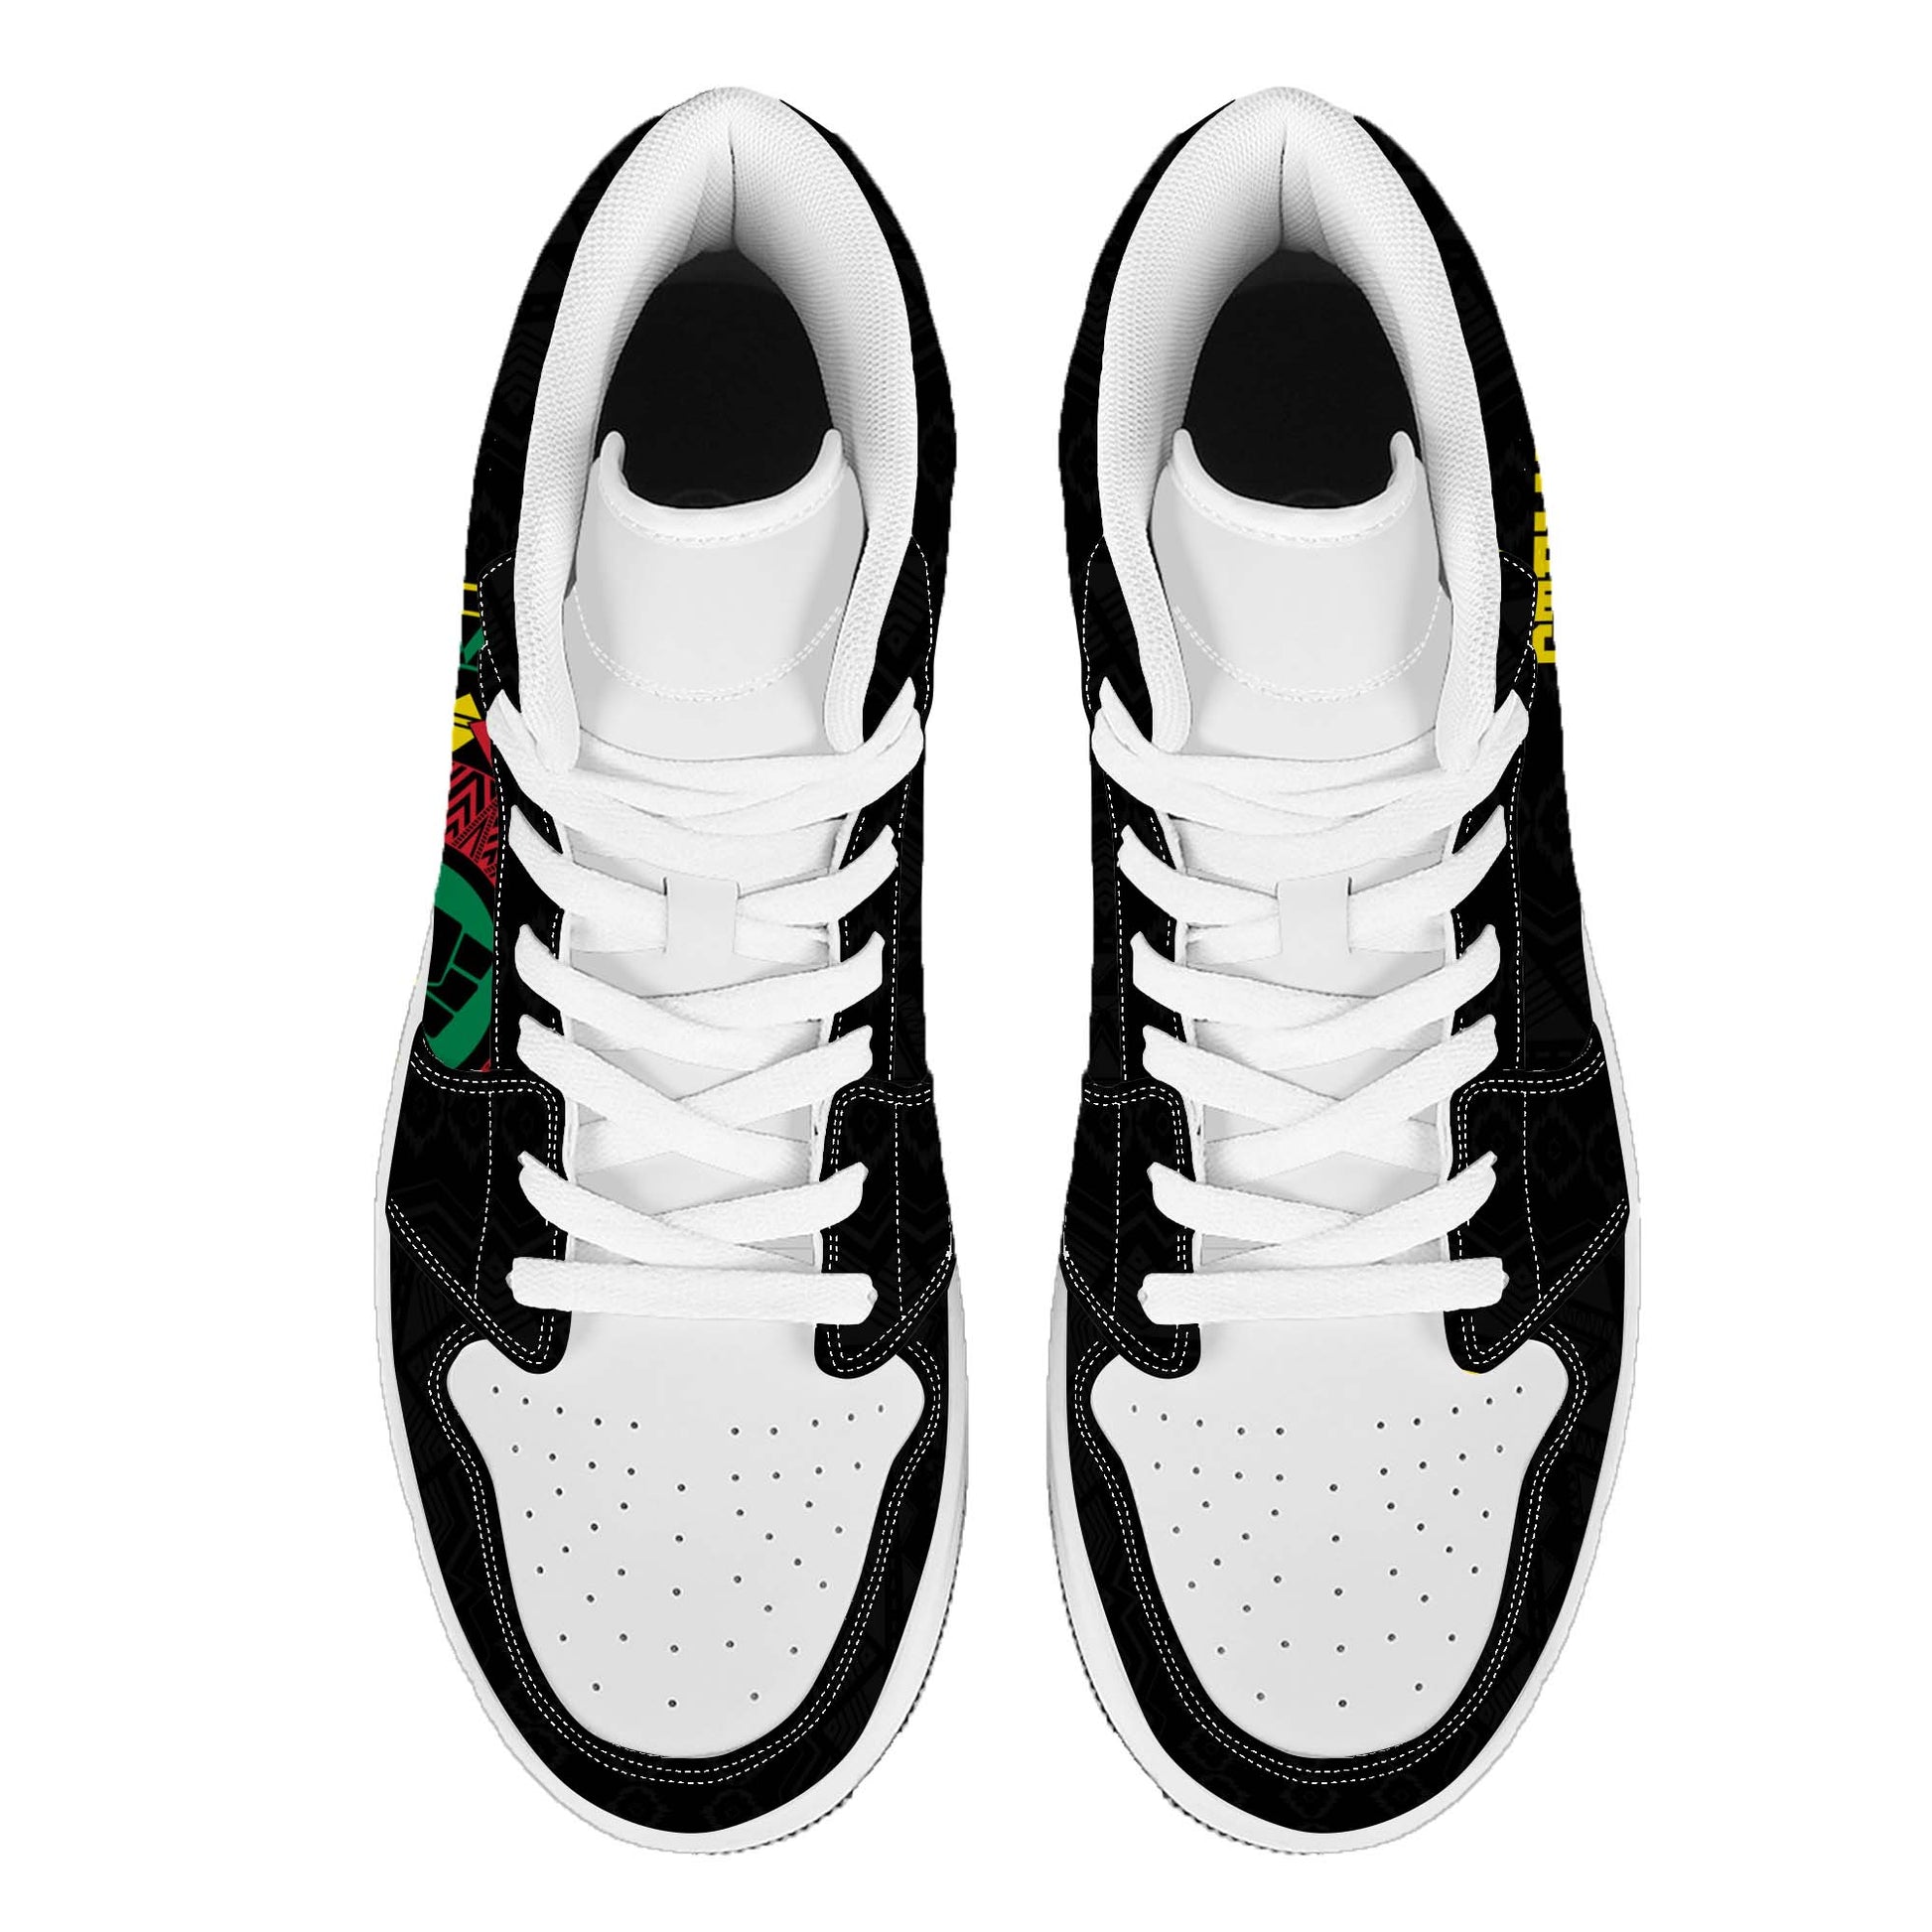 Personalized African Soul High Top Sneakers High Top Sneakers Tianci 